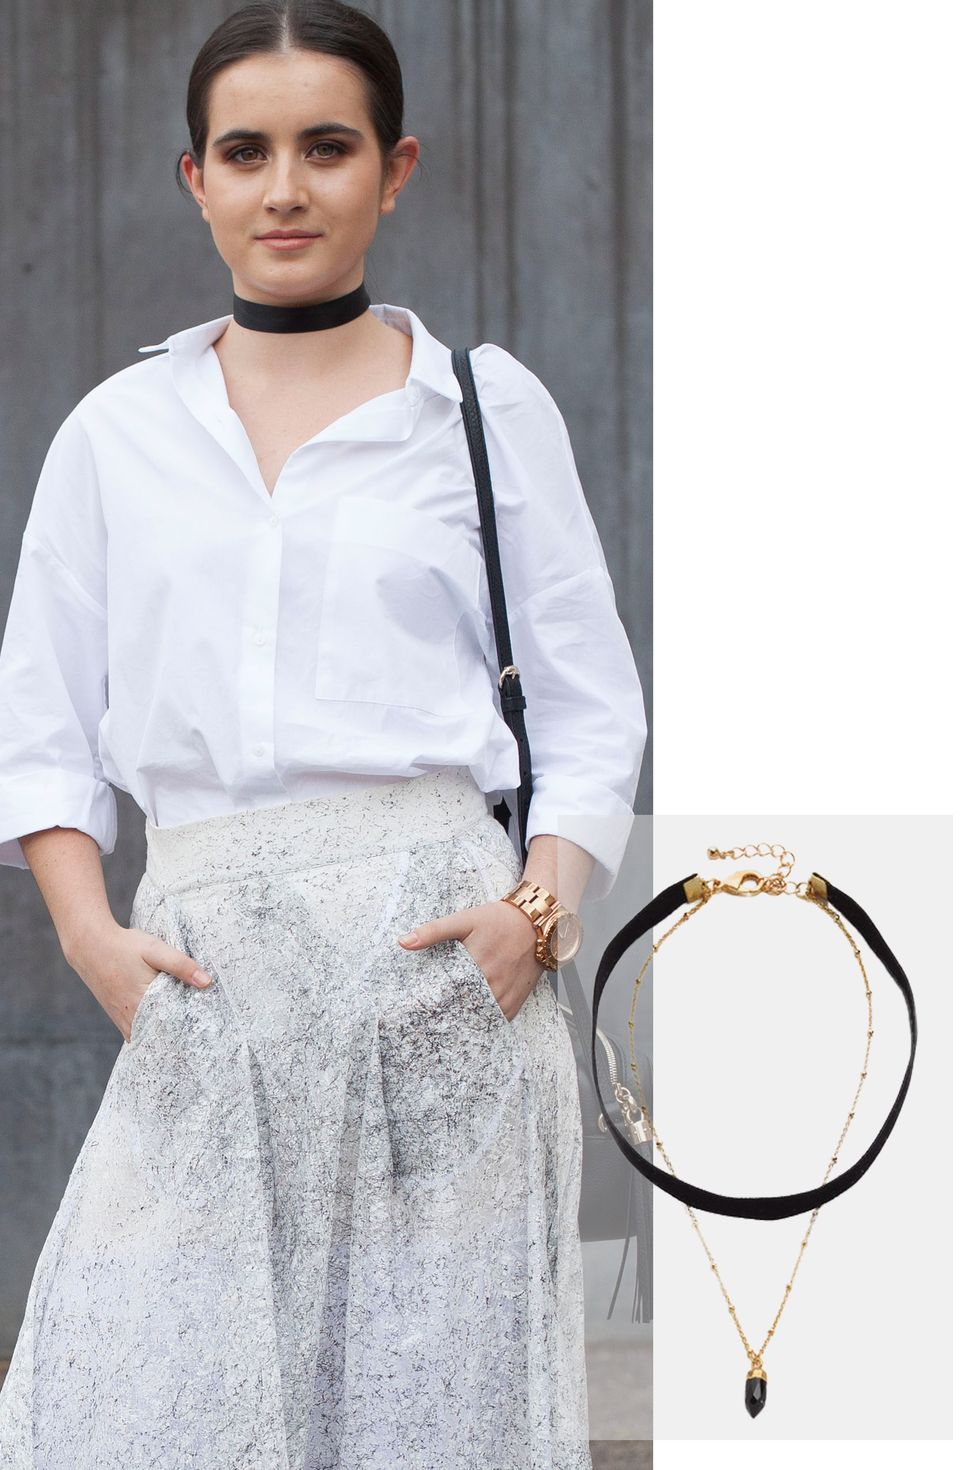 <p>According to Australian jewelry designer Samantha Wills, "it's definitely still about the choker," in Sydney. However, as Wills sees it, the trend has gotten more refined. "I'm seeing lots of glitter chains or layered necklaces that have a choker element, or girls are mixing a fine chain with a velvet choker," she explains.</p>

<p><em data-redactor-tag="em" data-verified="redactor">Lacey Ryan Double Dagger Choker Necklace, $66; </em><a href="https://www.shopbop.com/double-dagger-choker-necklace-lacey/vp/v=1/1510071803.htm" target="_blank" data-tracking-id="recirc-text-link"><em data-redactor-tag="em" data-verified="redactor">shopbop.com</em></a></p>